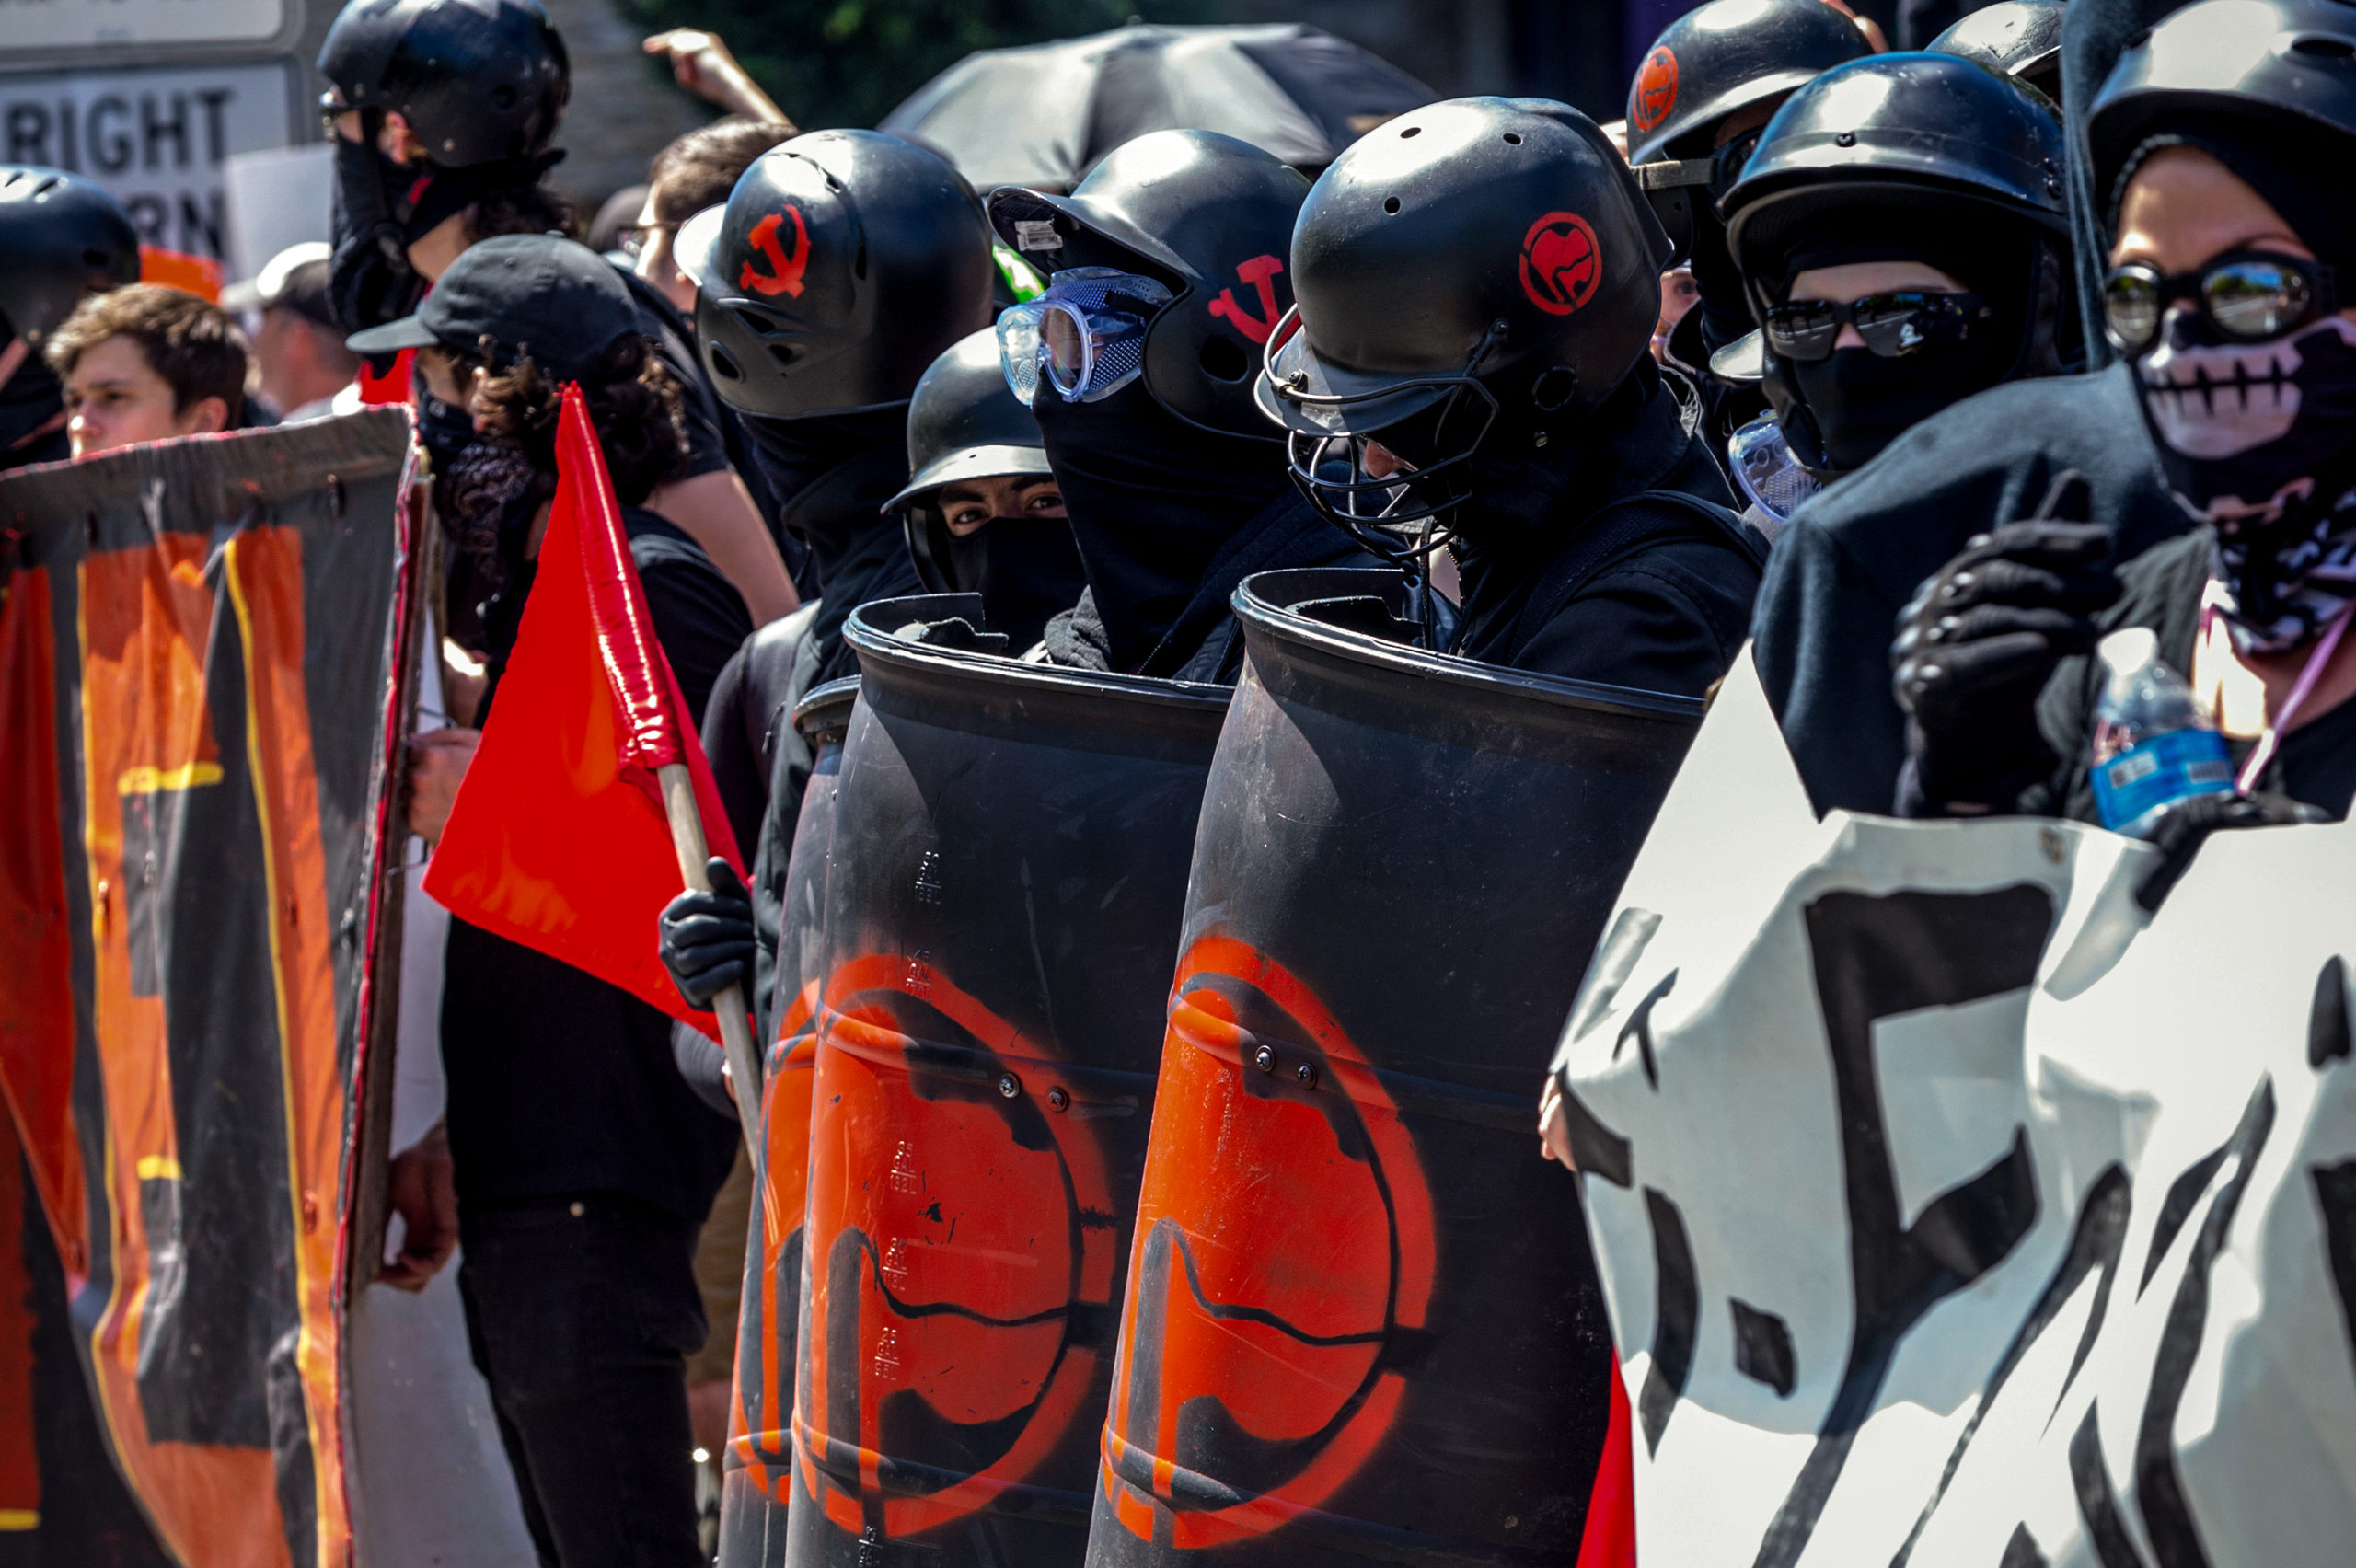 PORTLAND, OR - AUGUST 4: Members of the Antifa at the Patriot Prayer Rally in downtown Portland, OR, on August 4, 2018. (Photo by Diego Diaz/Icon Sportswire via Getty Images).